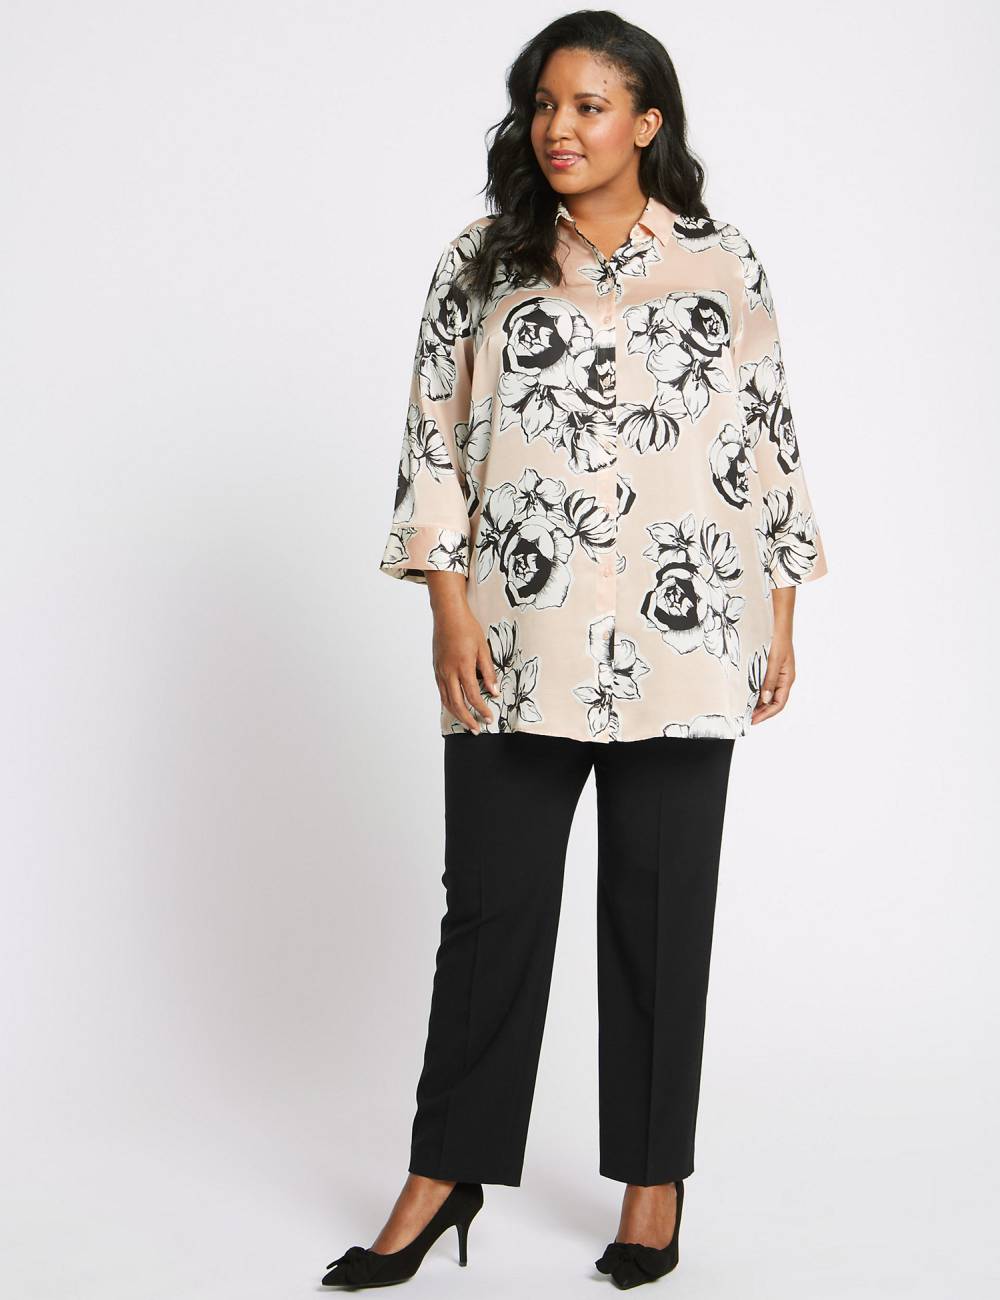 marks spencer ethical plus size clothes